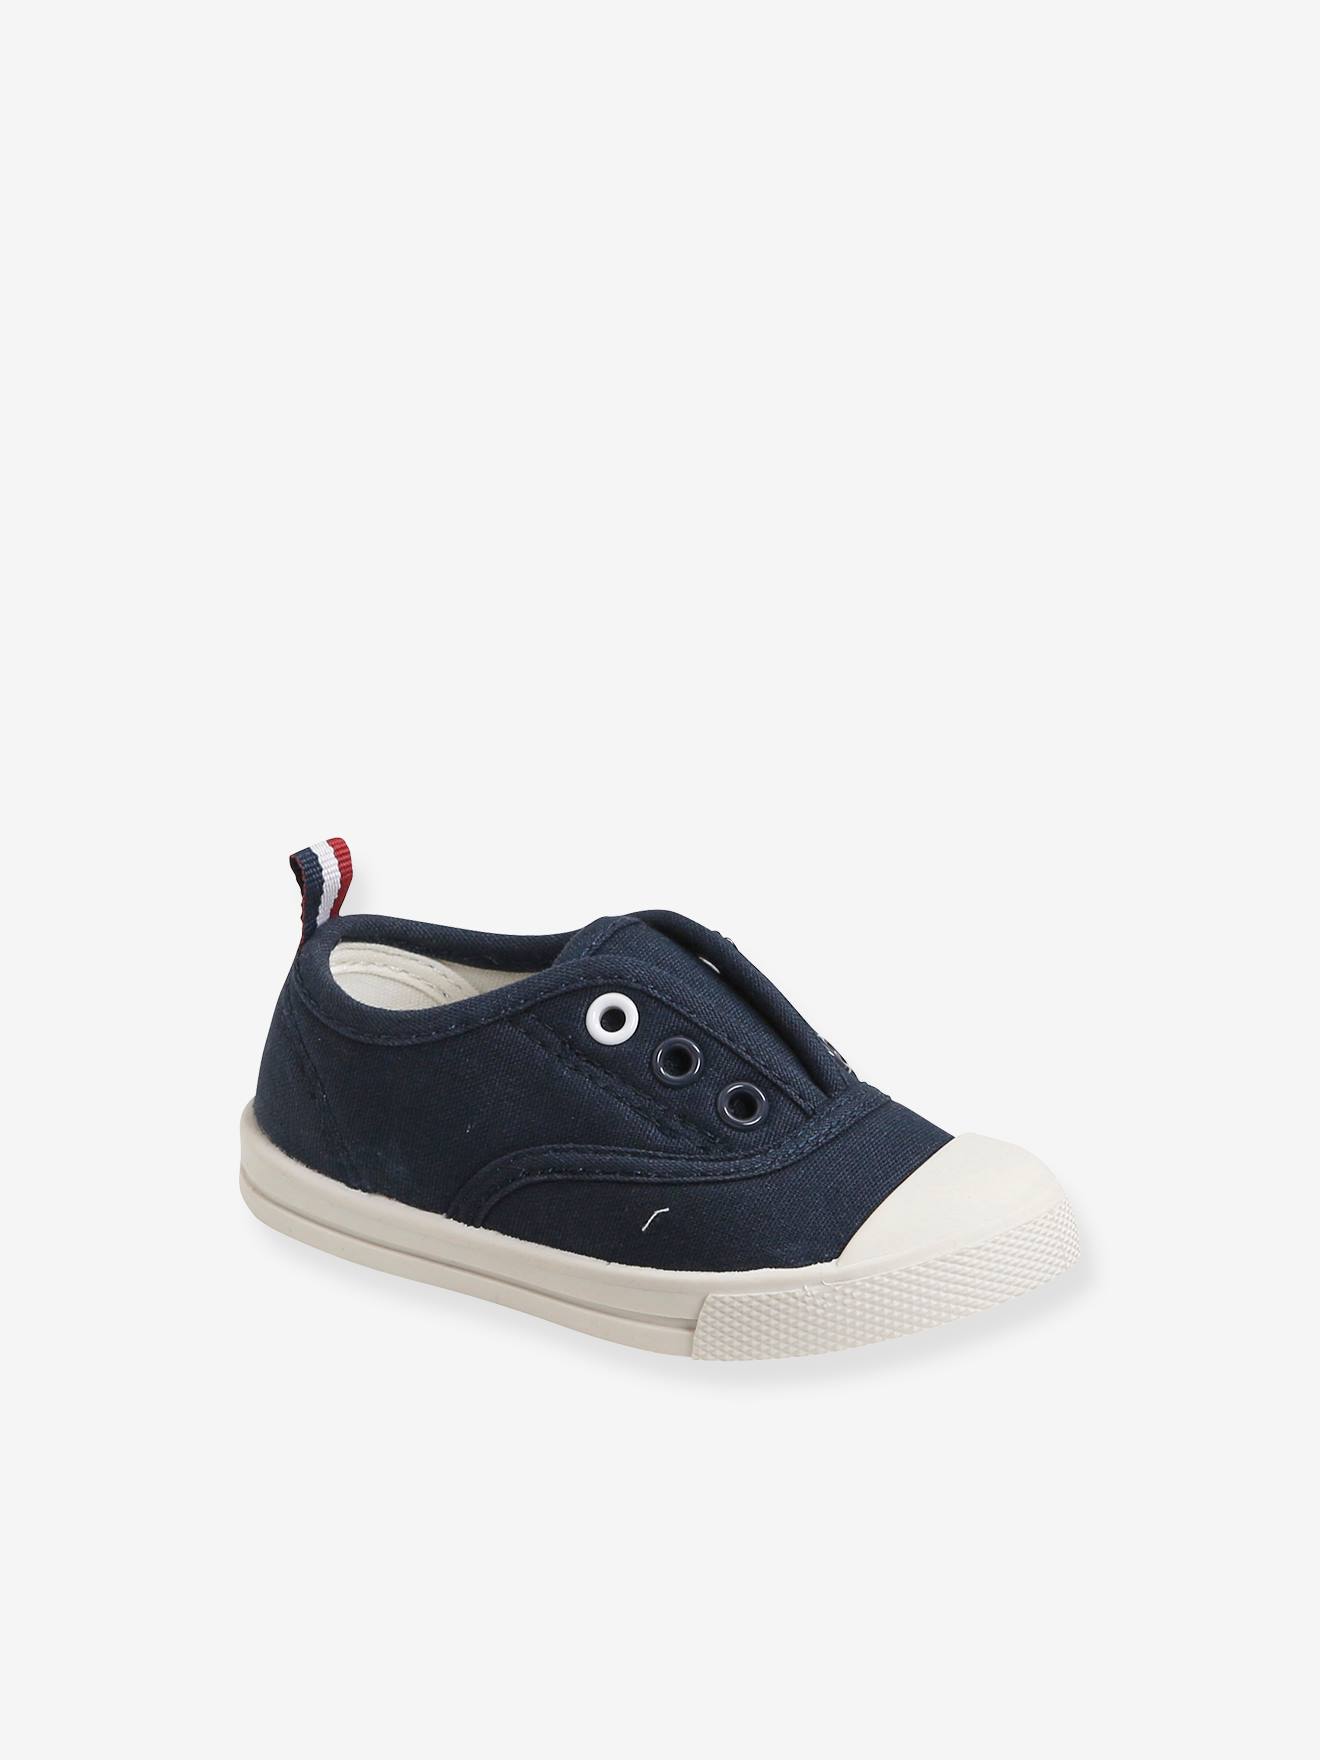 Boys Blue Sneakers Trainers 